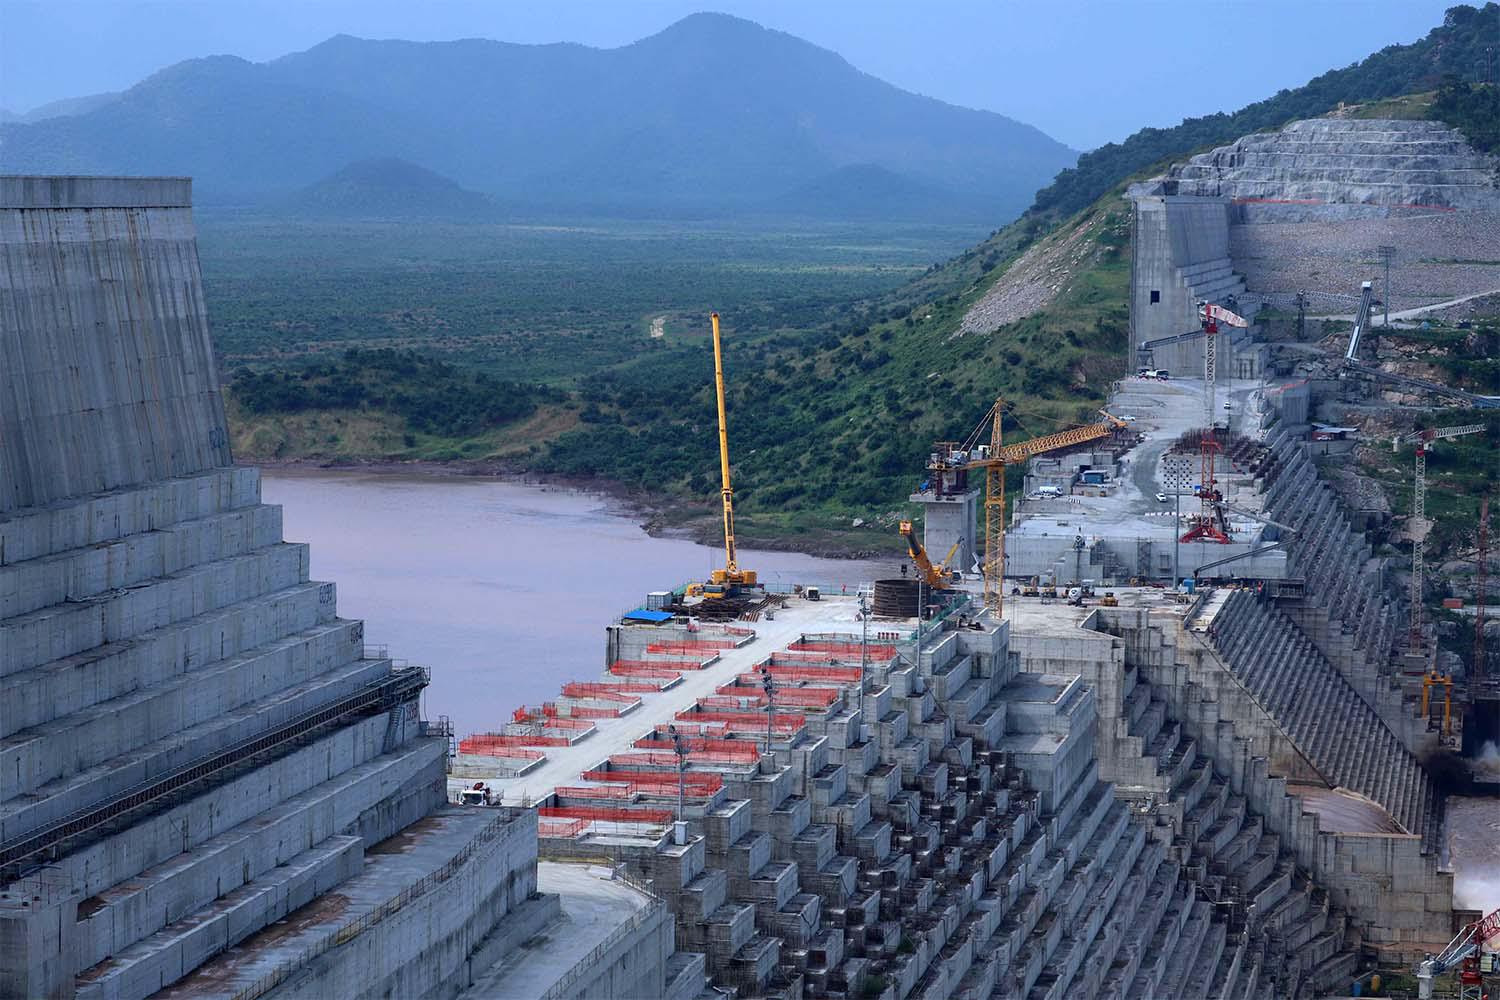 Sudan had previously proposed four-party mediation over the dam involving the AU